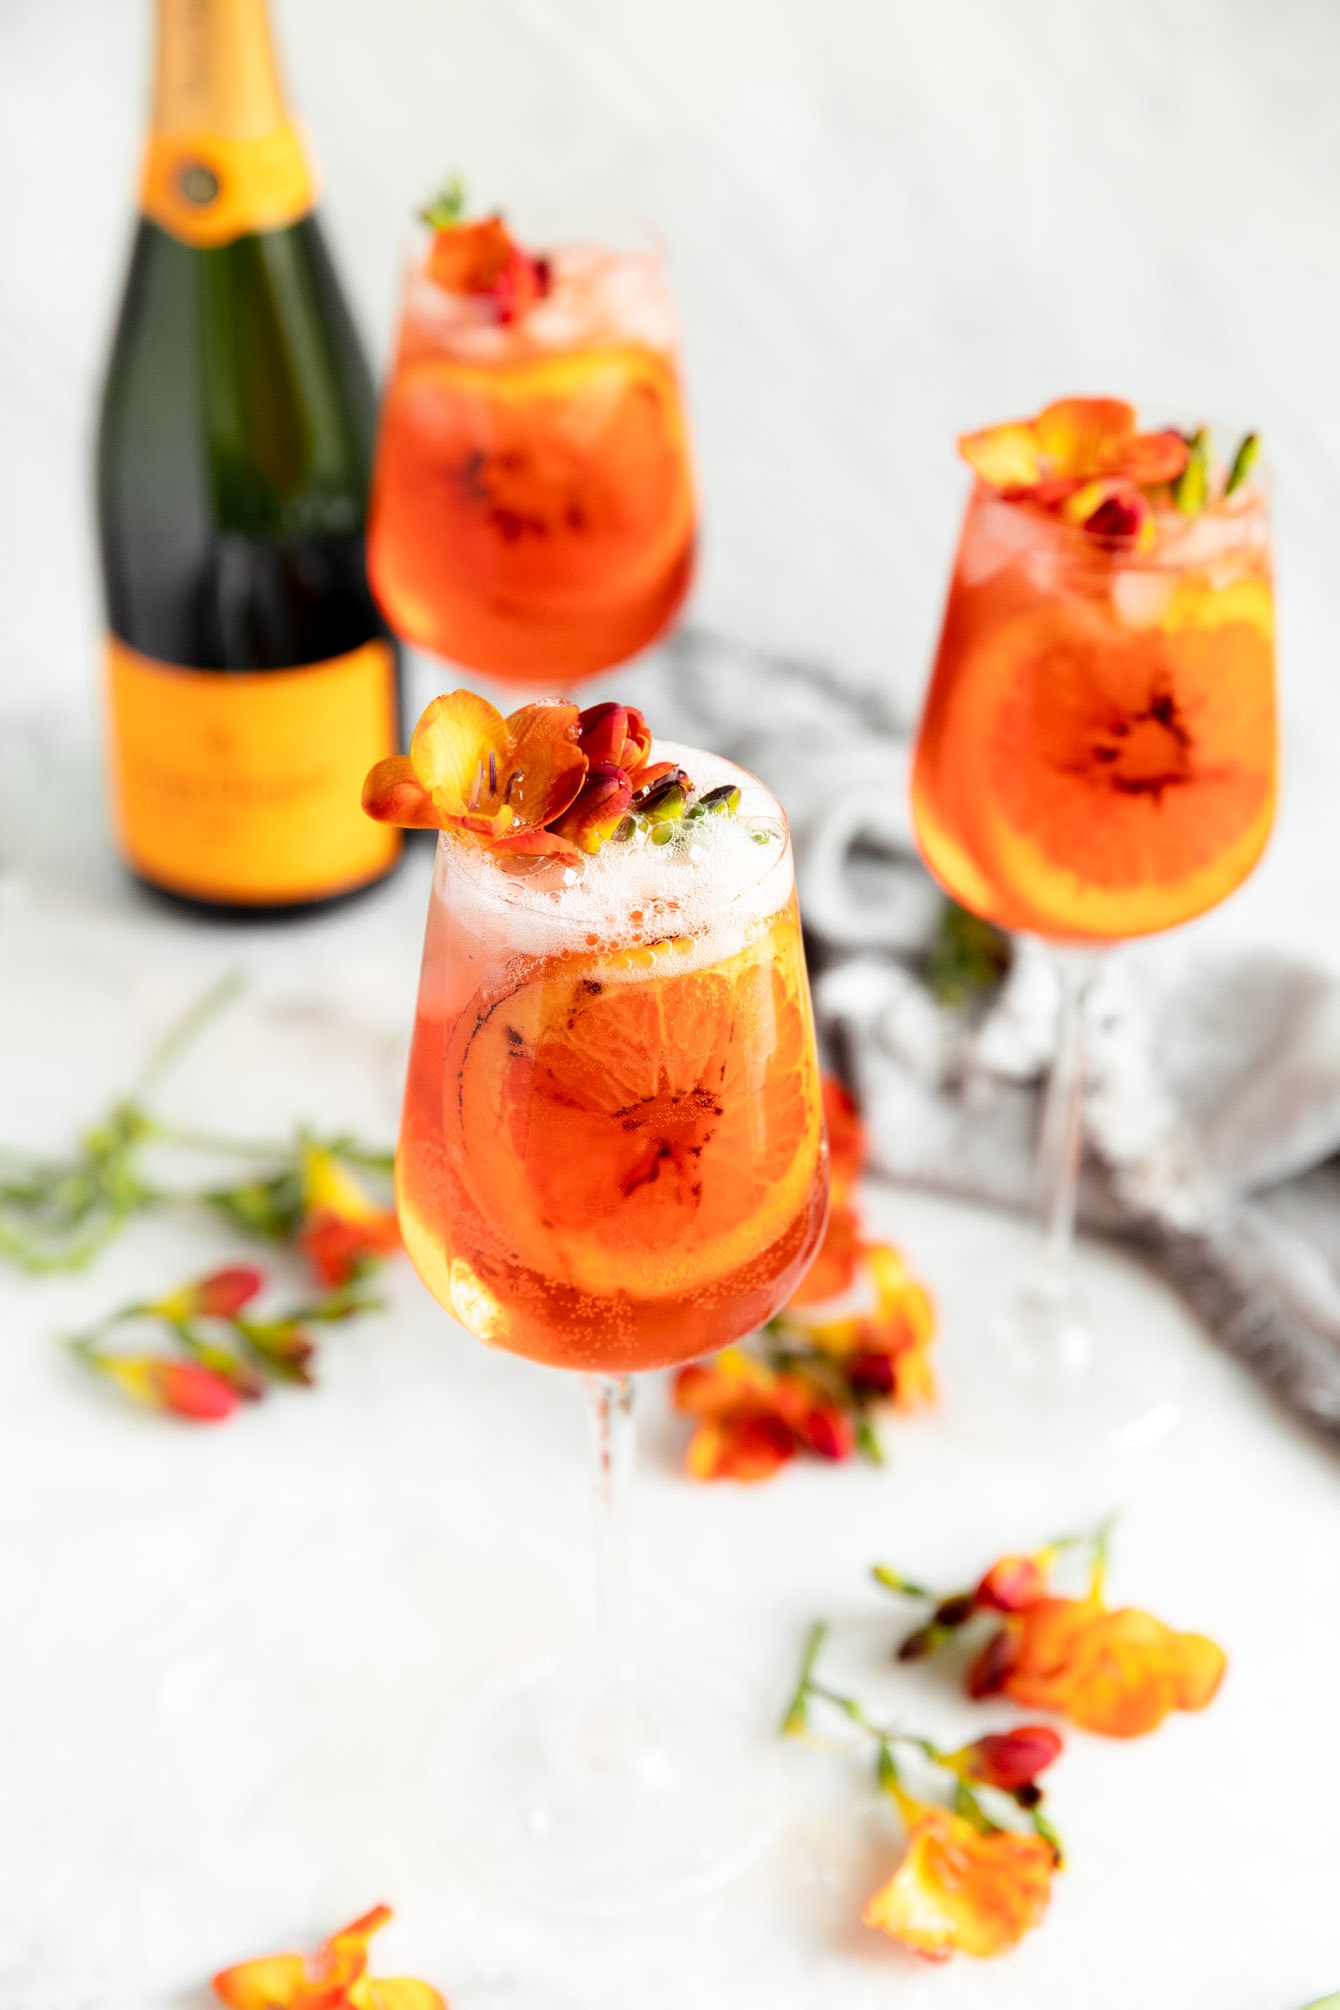 Summer cocktail season is here! We're celebrating with this bubbly and refreshing easy aperol spritz recipe. Perfect for a hot night. Or day :)